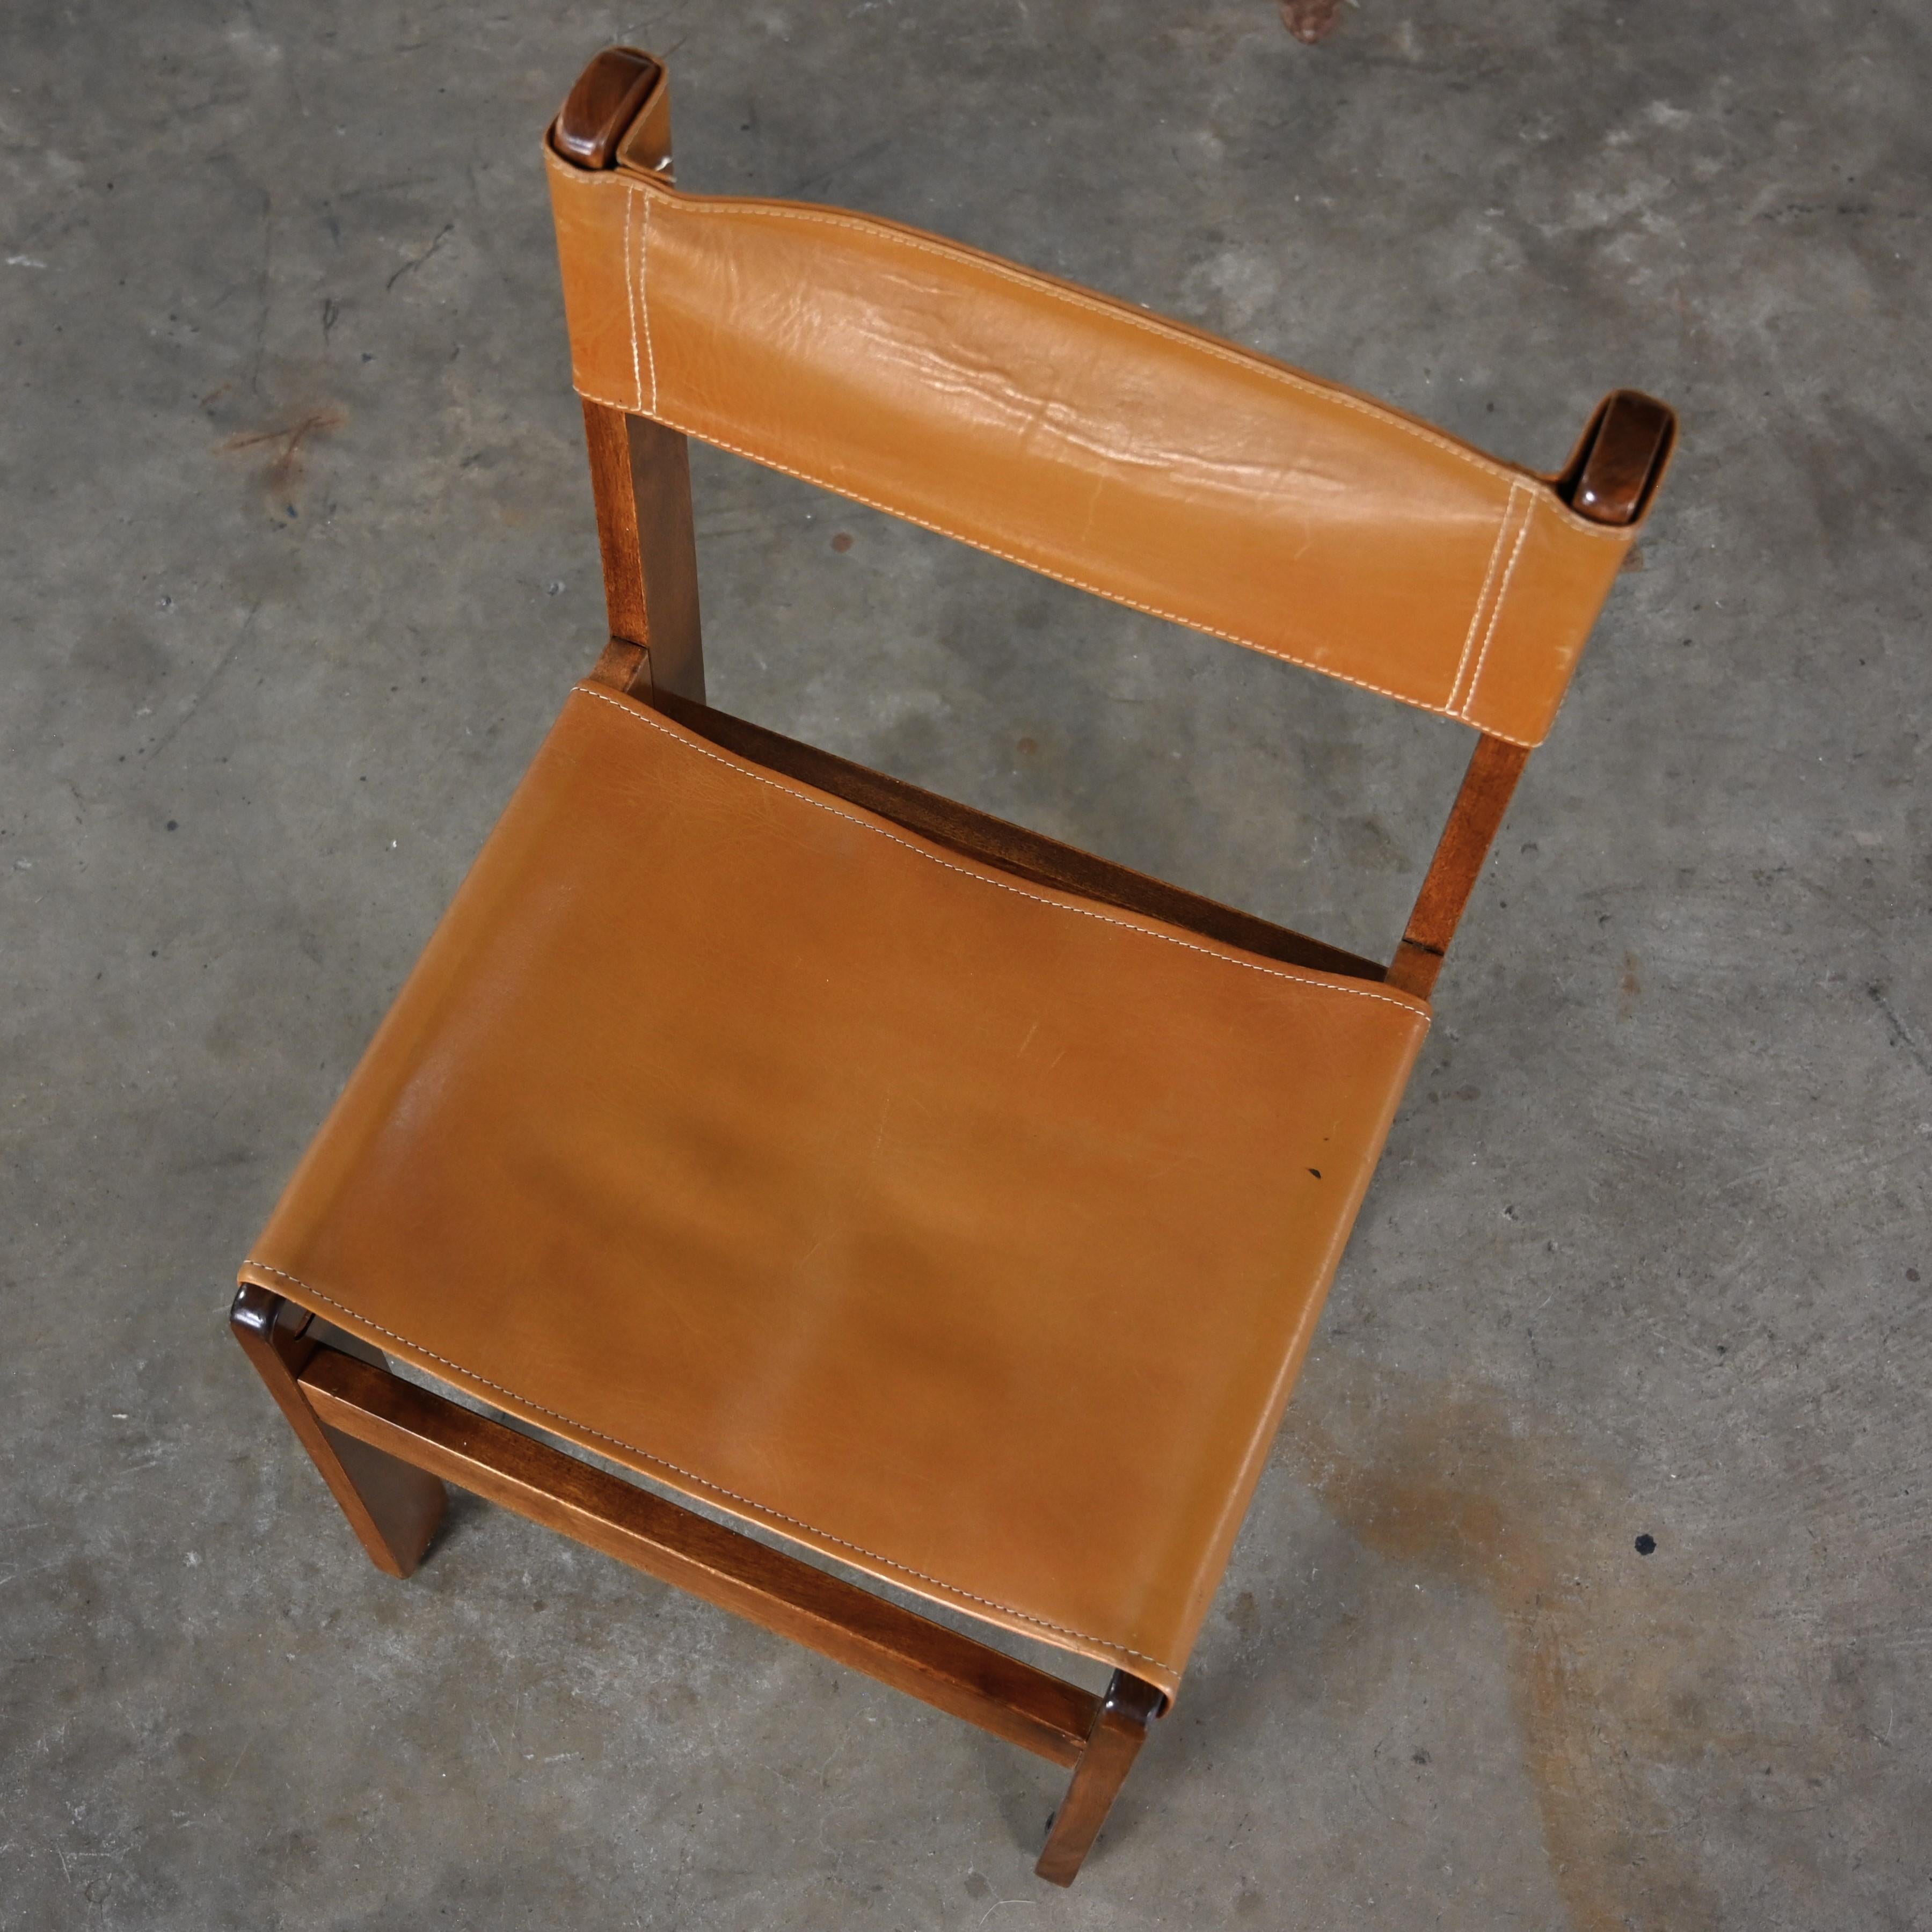 1970’s Modern Sling Chair Teak & Leather Style Michel Arnoult Made in Argentina For Sale 6